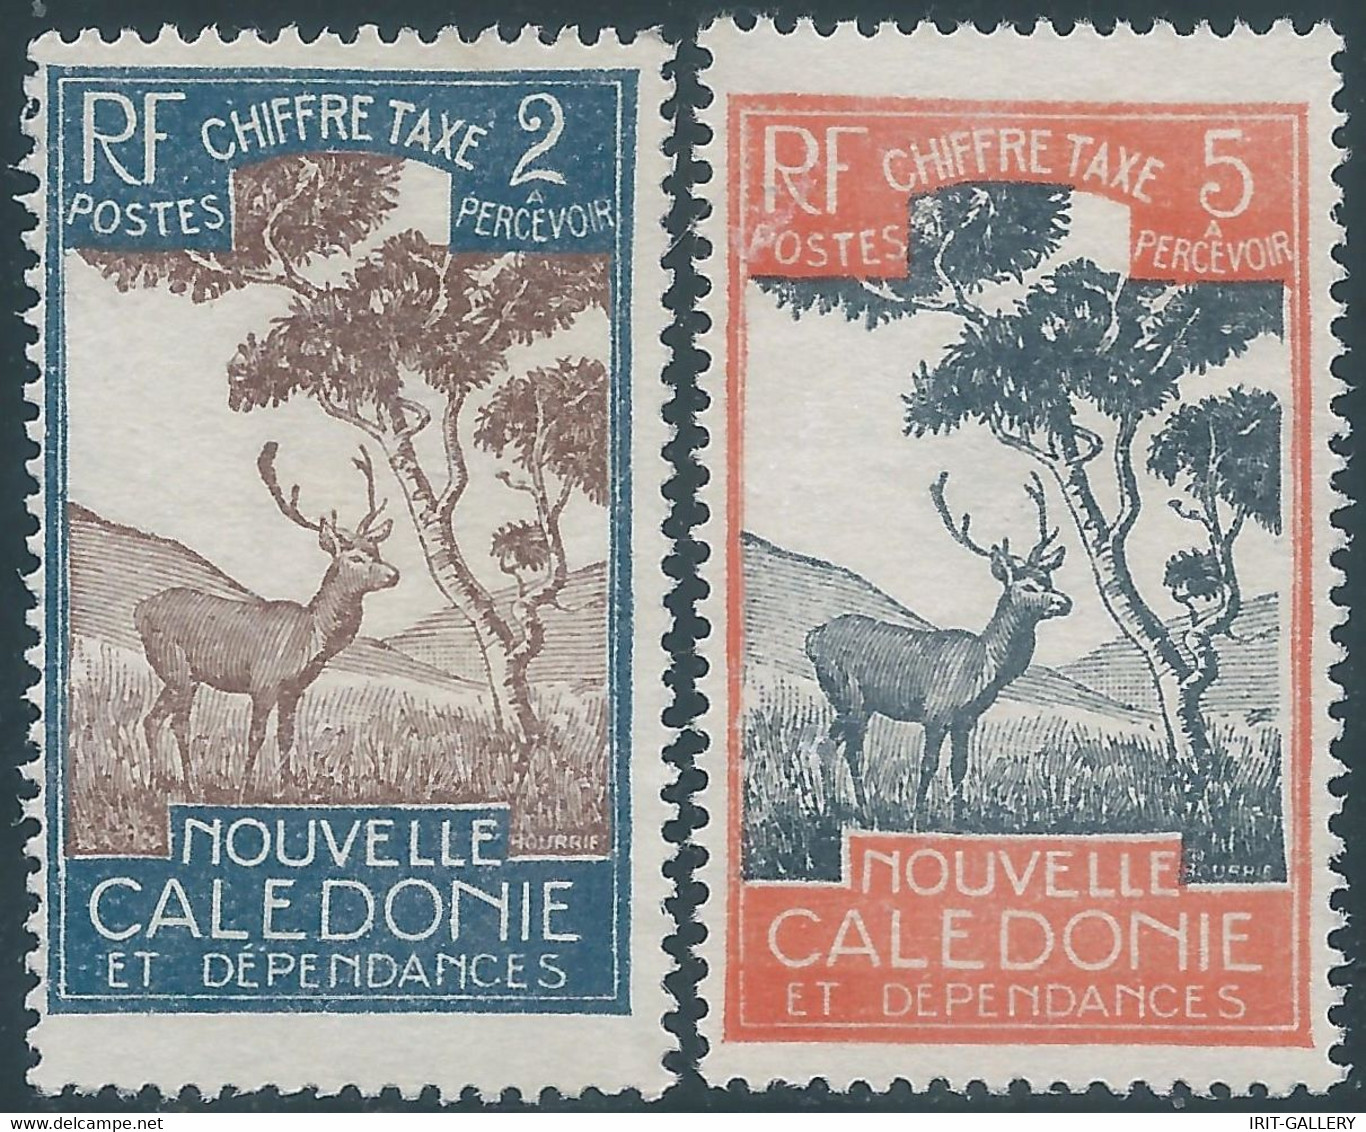 FRANCE,Calédonie - New Caledonia,1920 CHIFFER TAXE,Revenue Stamps Fiscal Tax,2 & 5F,Mint - Portomarken